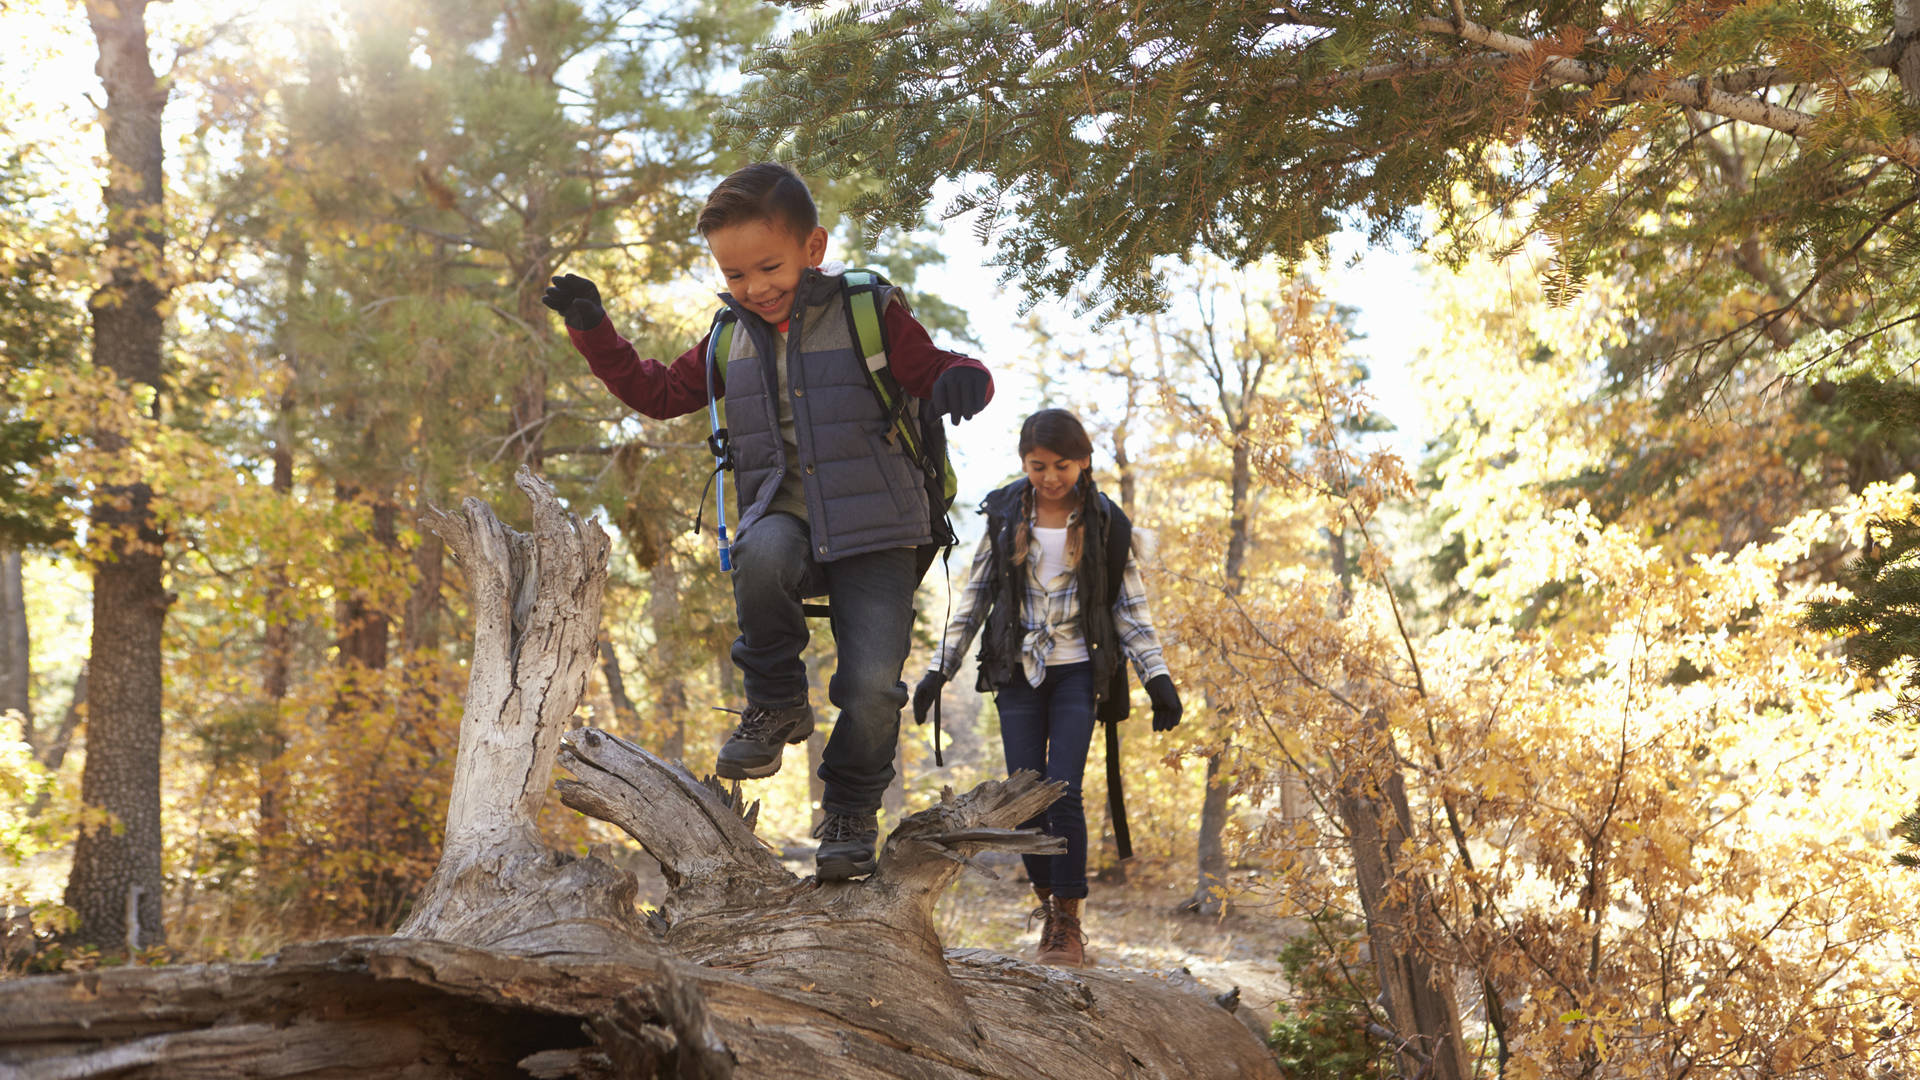 Four STEM Tools to Get Kids Learning and Exploring Outdoors